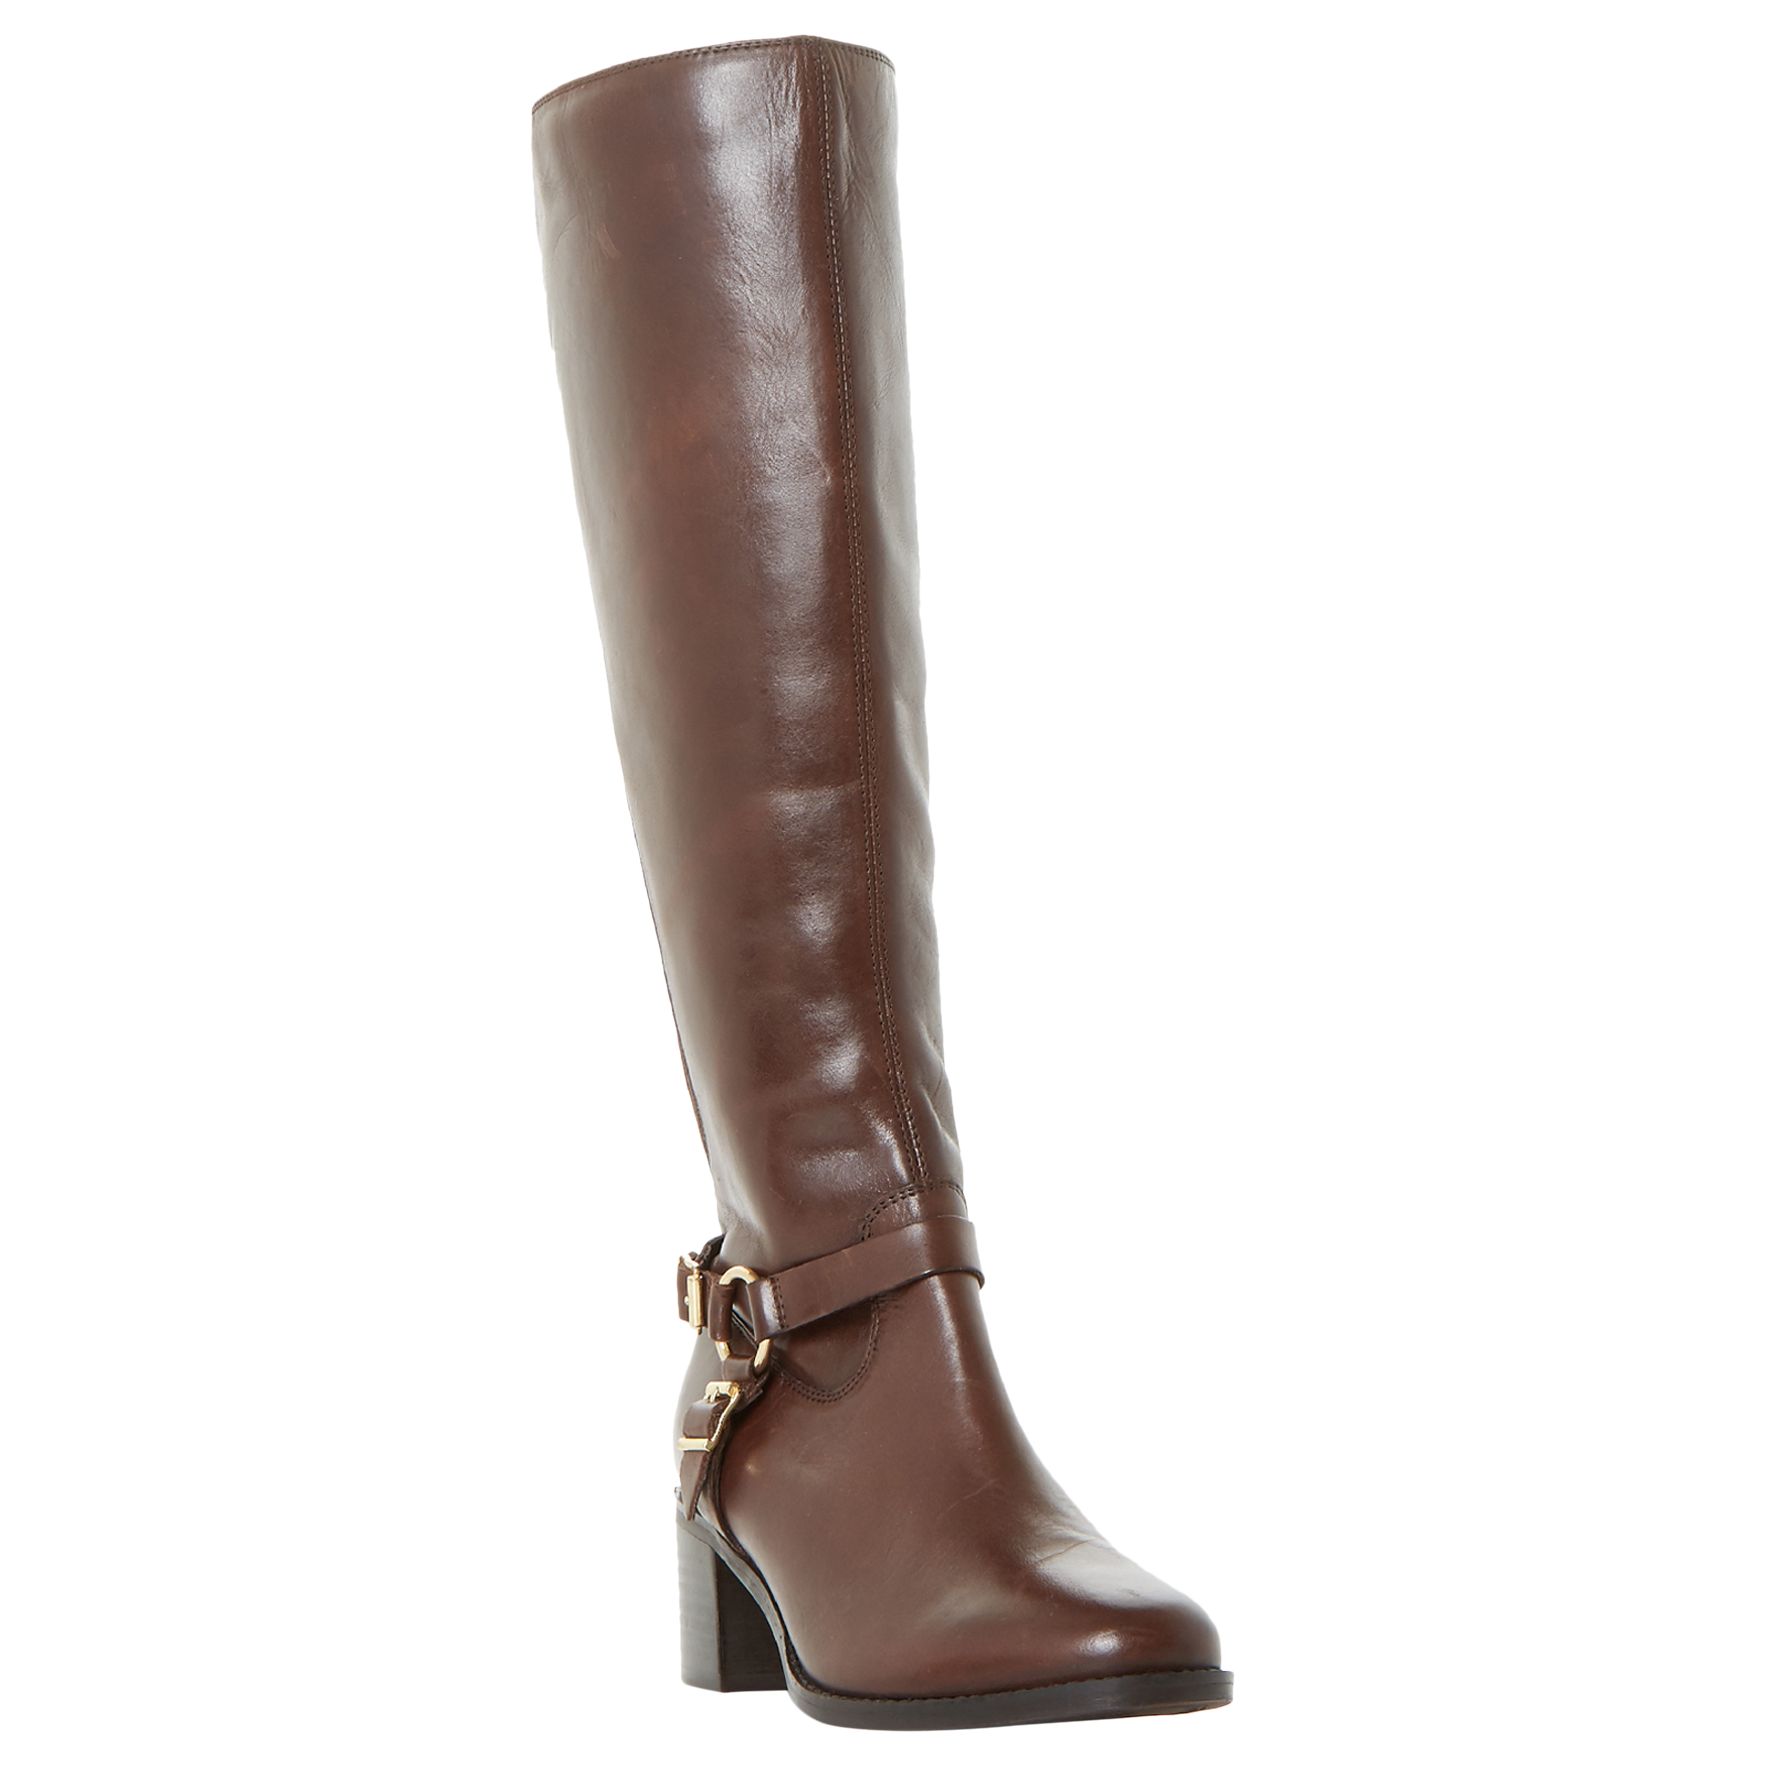 Dune Vicky Block Heeled Knee High Boots, Brown, 7